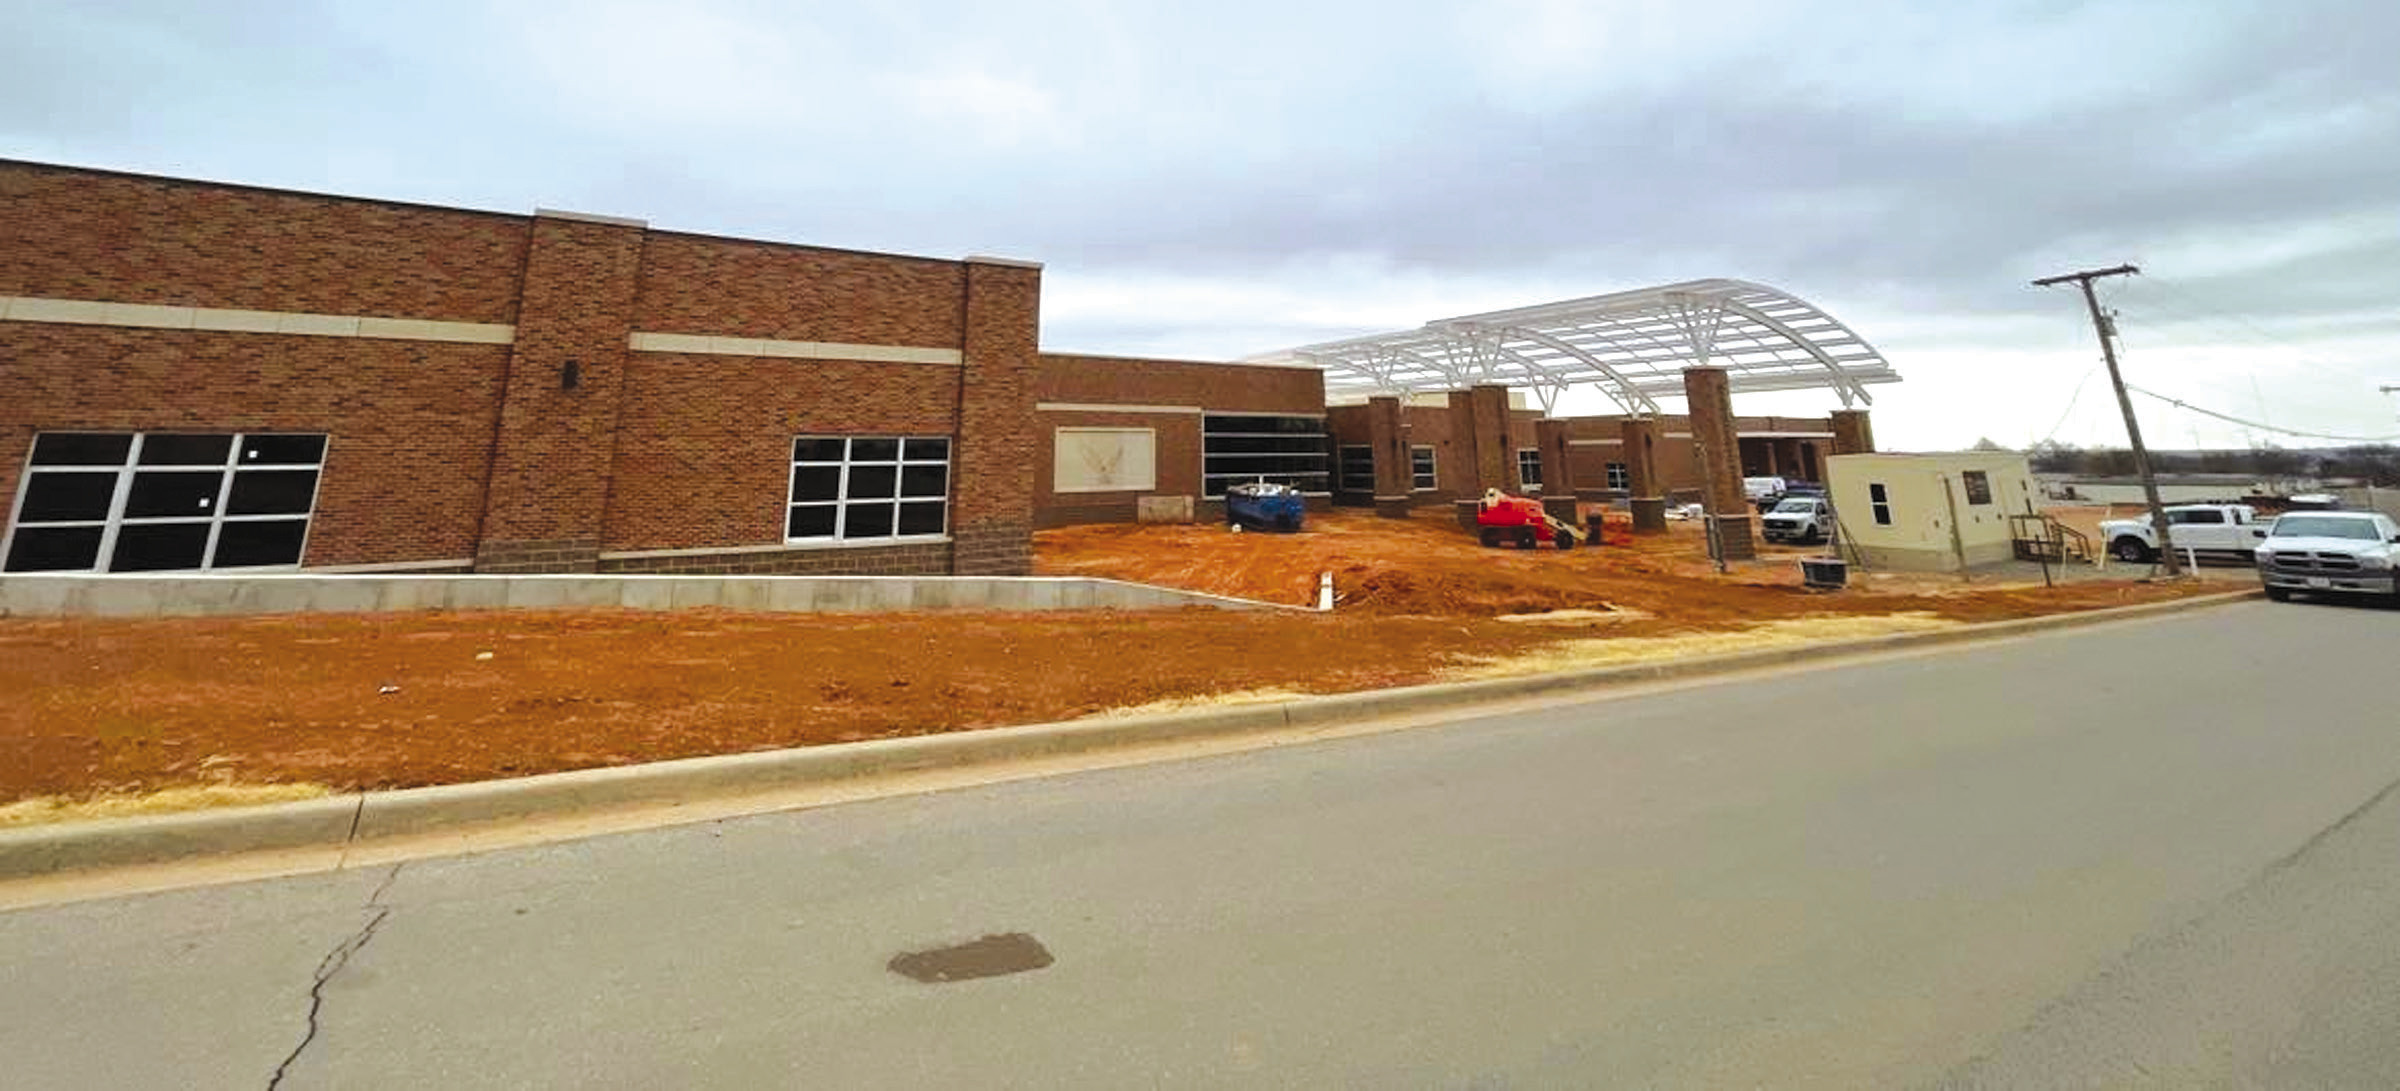 Construction continues on Gen. Thomas P. Stafford Elementary.